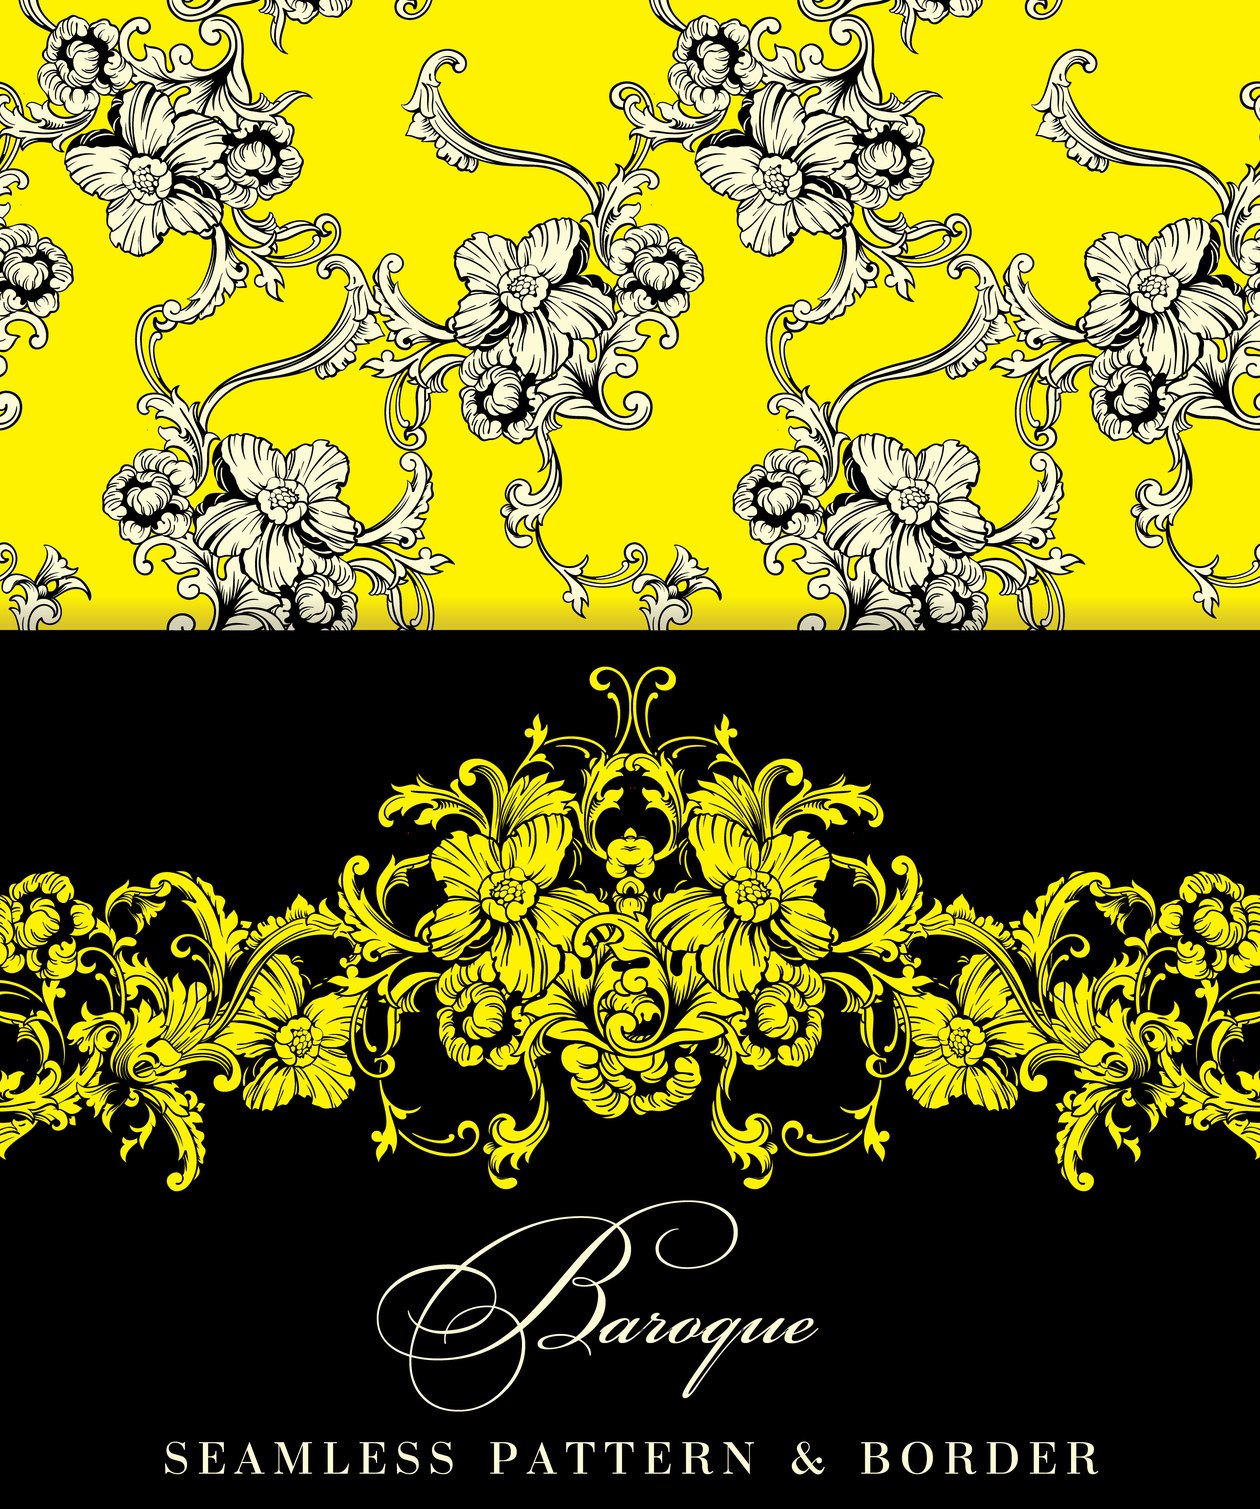 Seamless vector background. Baroque pattern and border. Photoshop brush